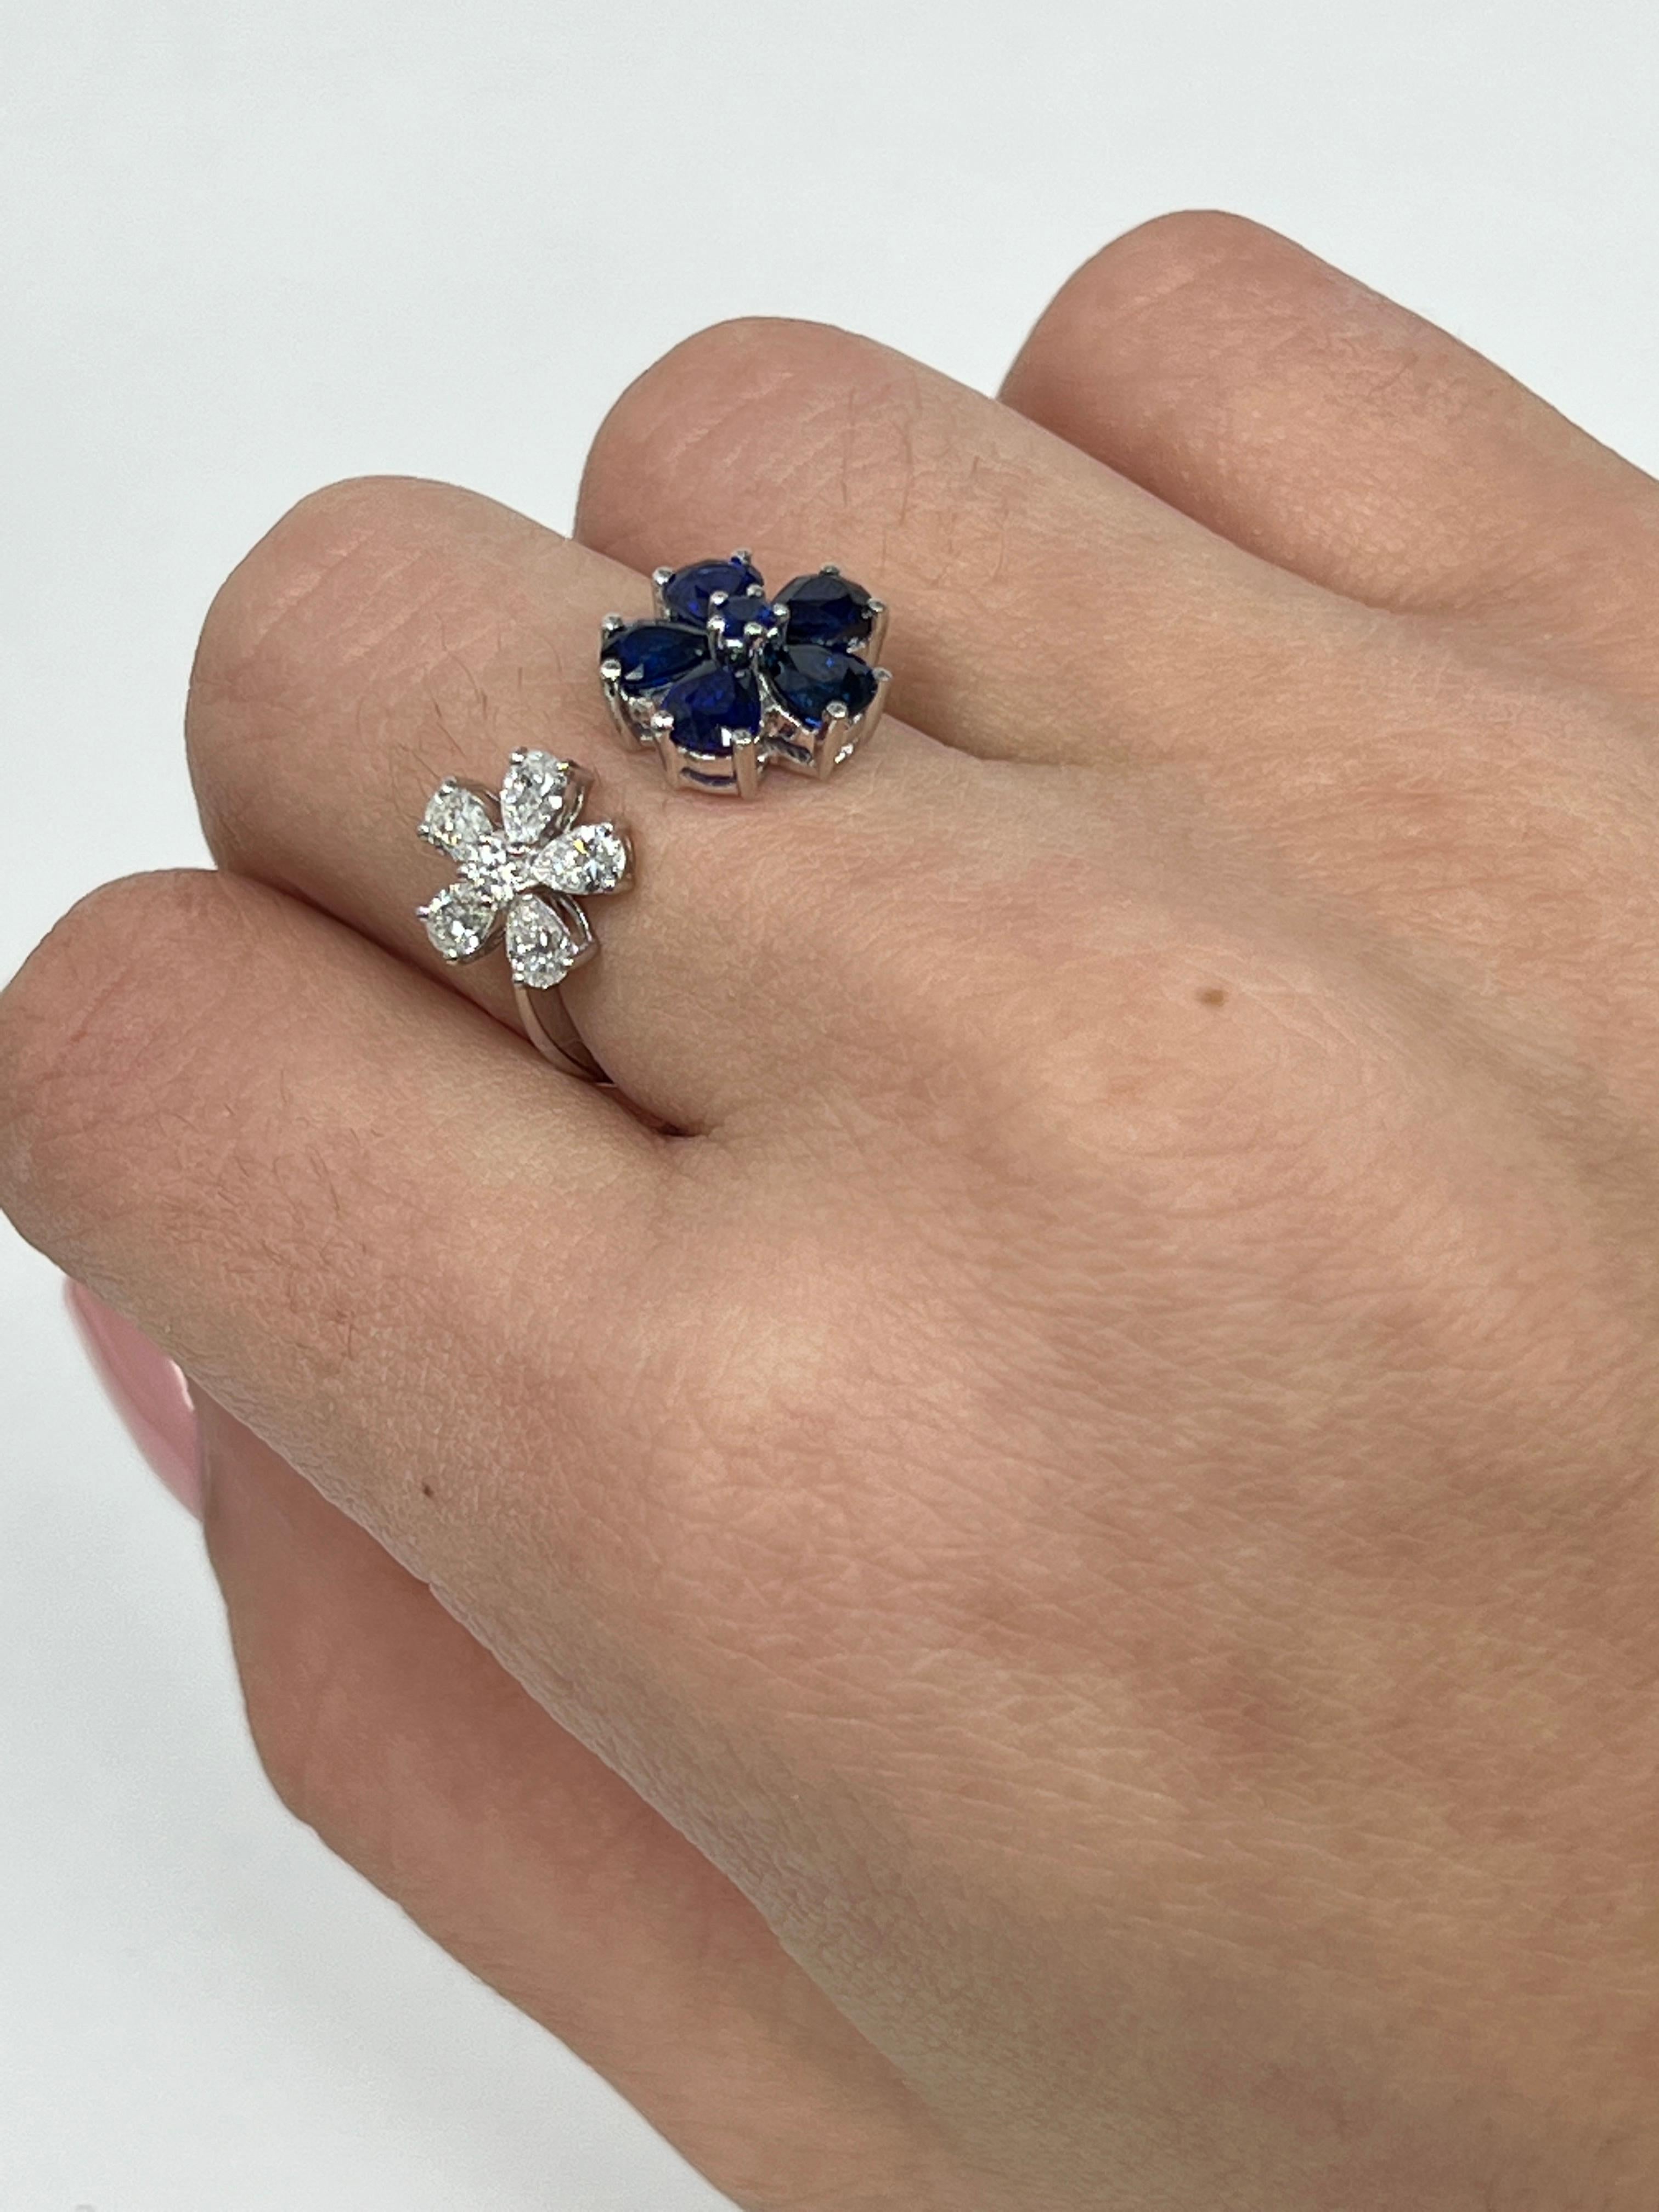 Women's Double Flower Diamond and Sapphire Ring For Sale